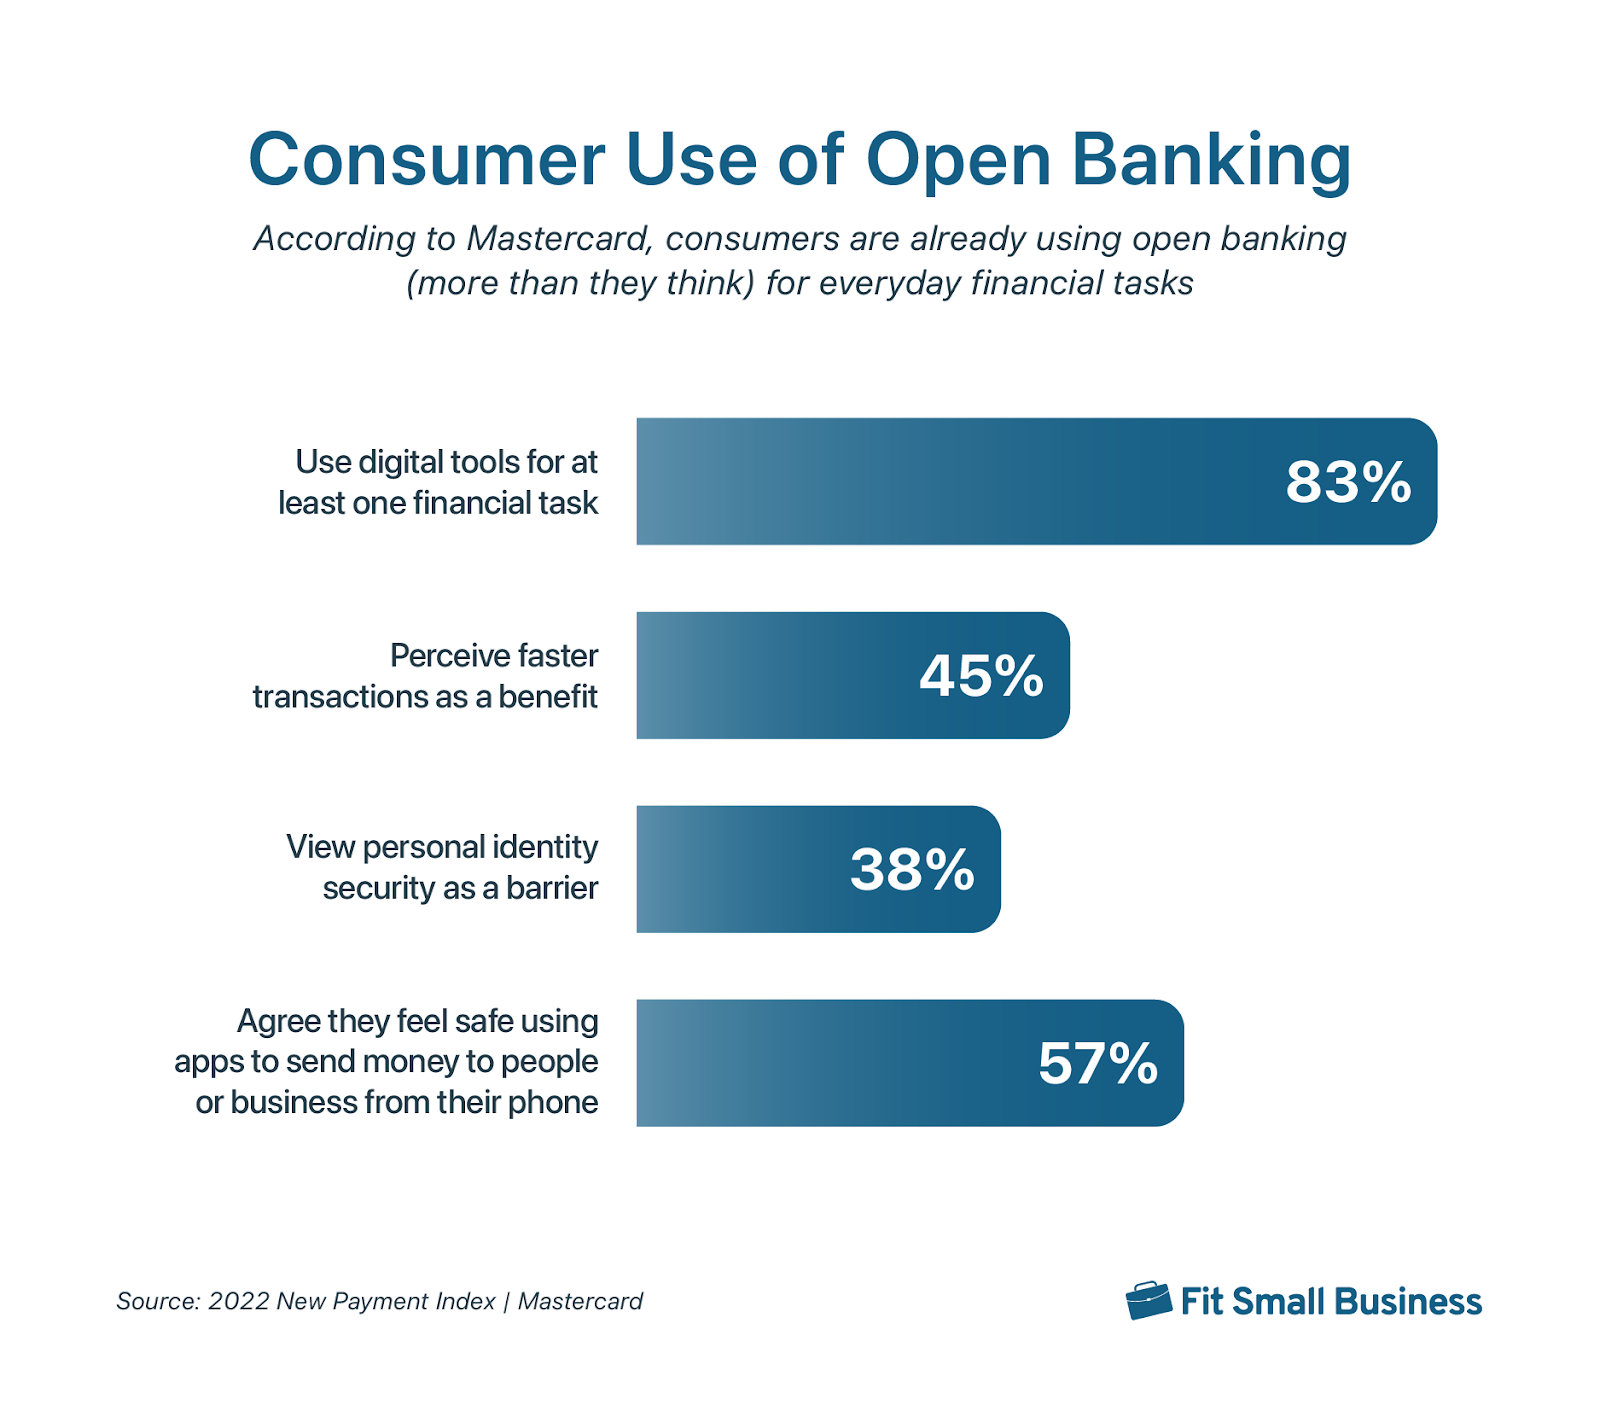 Graph showing consumer use of open banking and primary reasons.